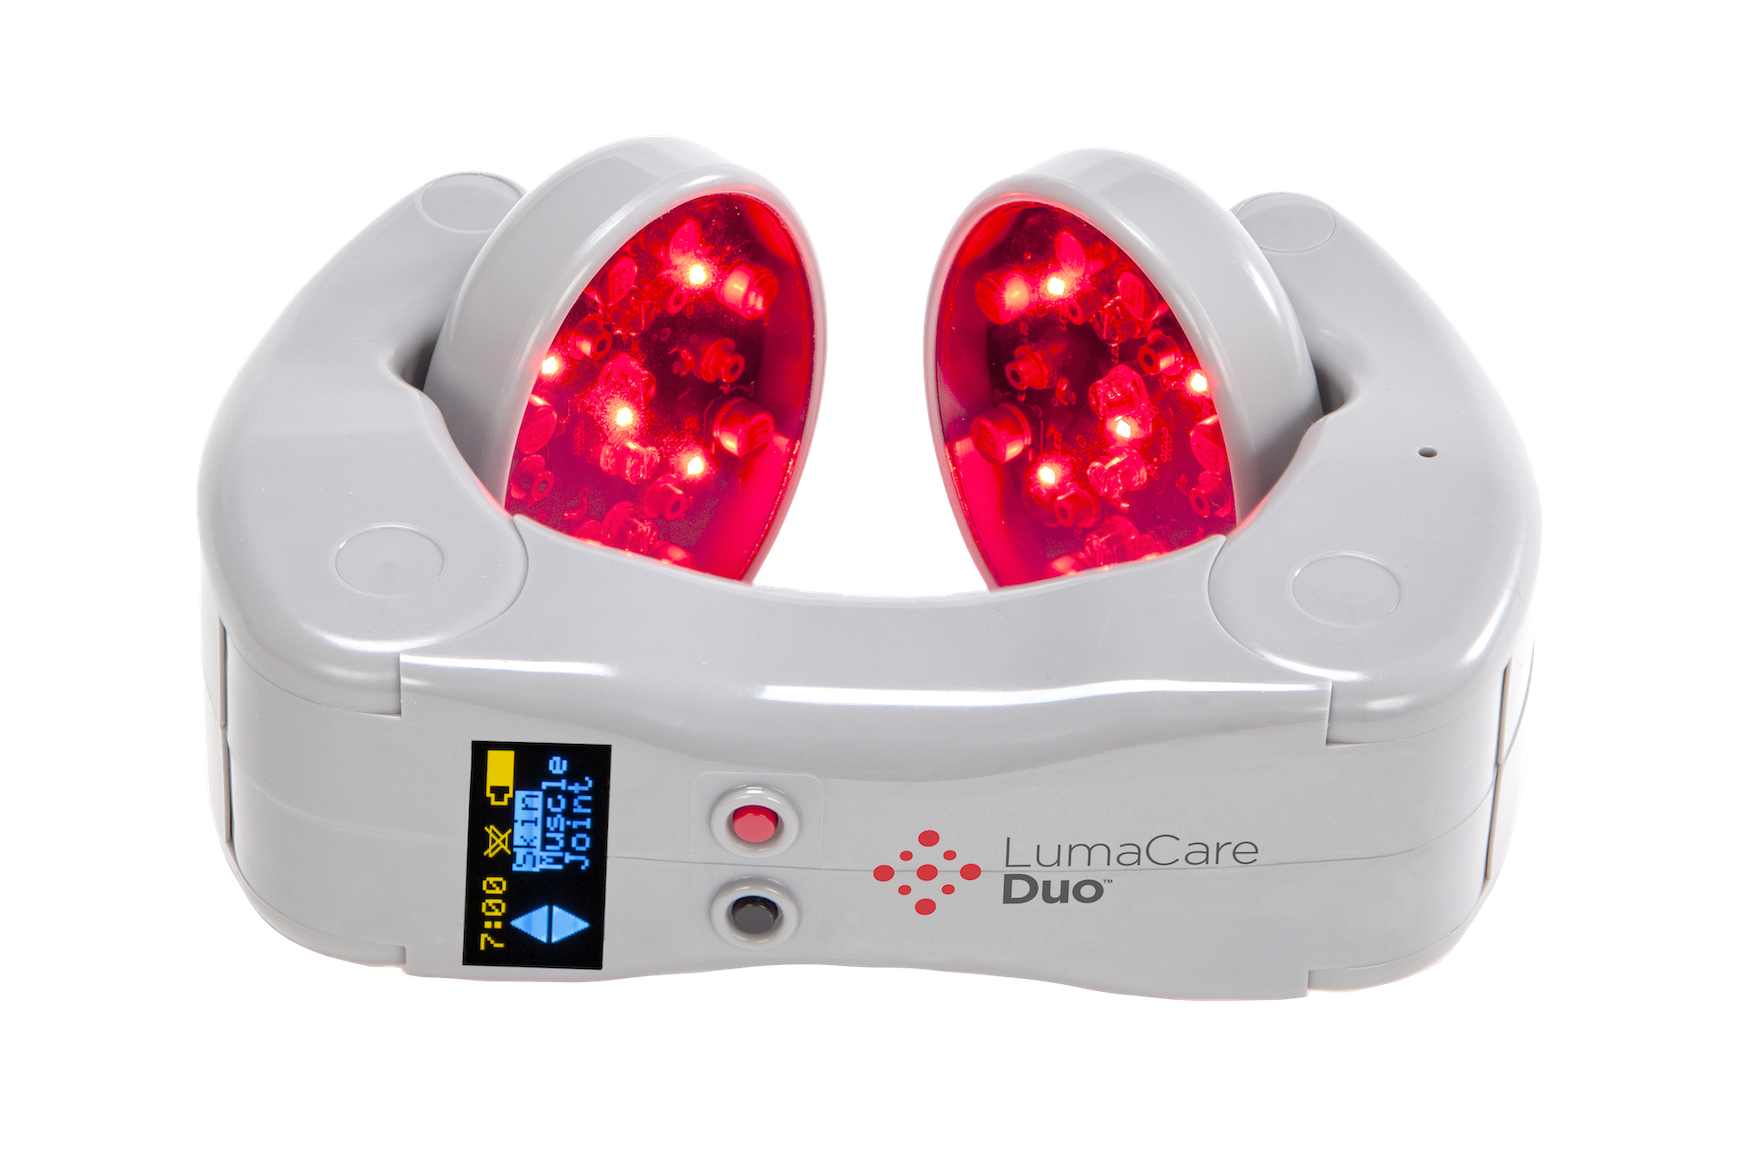 LumaCare's new LumaCare Duo is a lightweight, handheld, wireless and rechargeable "Cold Laser" system that sets a new standard in helping reduce/eliminate pain and treat minor, traumatic and chronic i